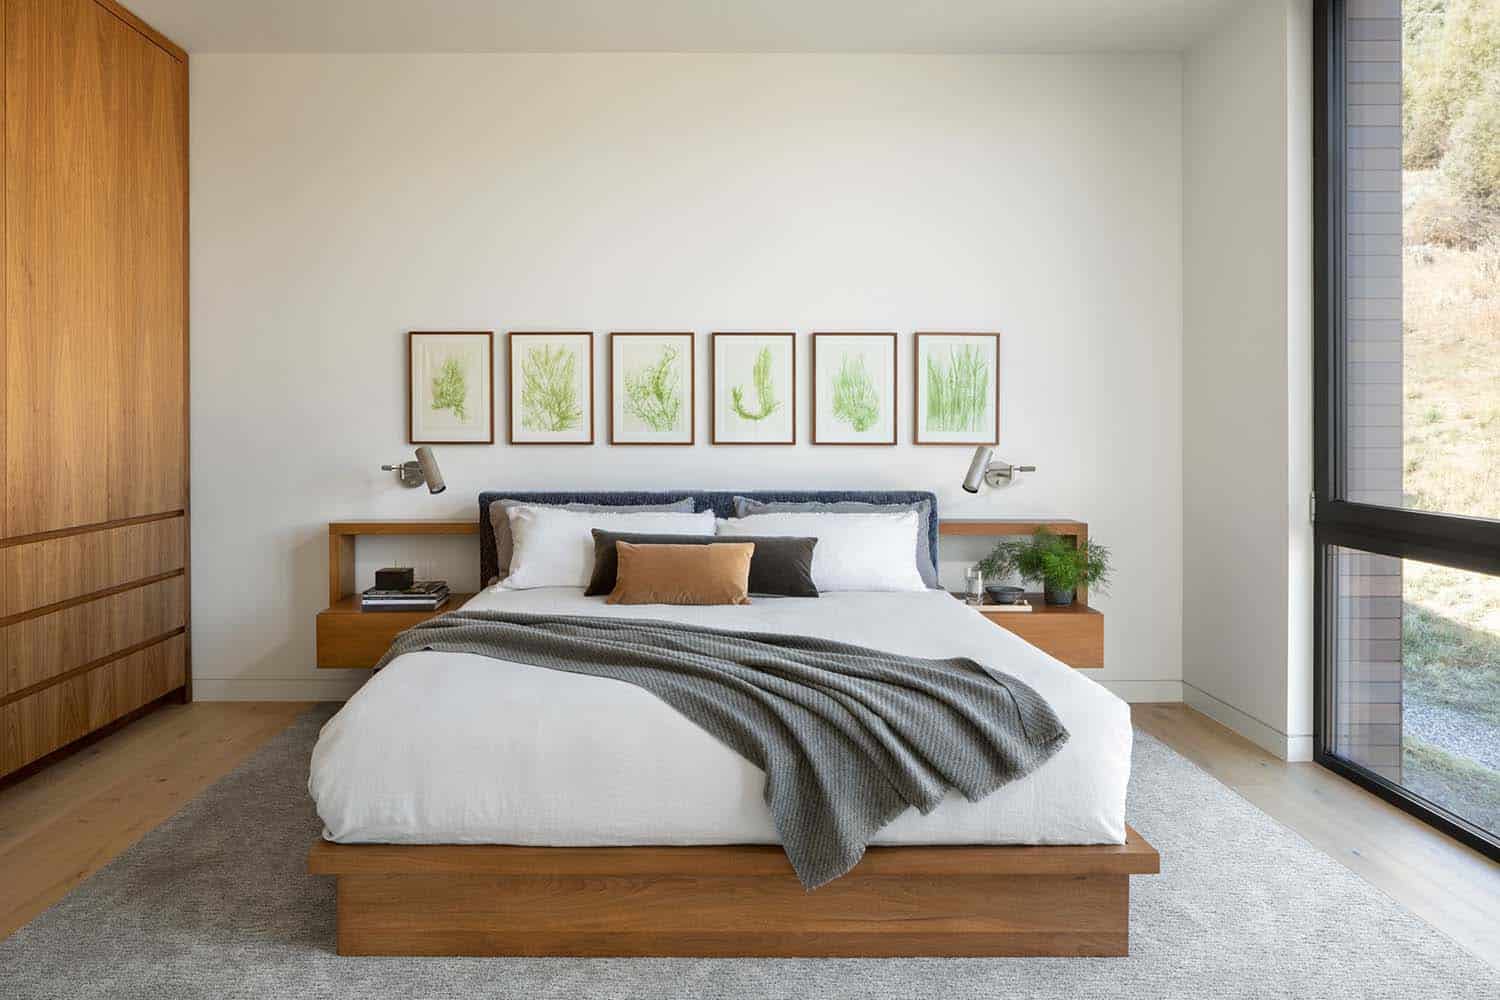 modern bedroom with a platform bed and artwork above the headboard